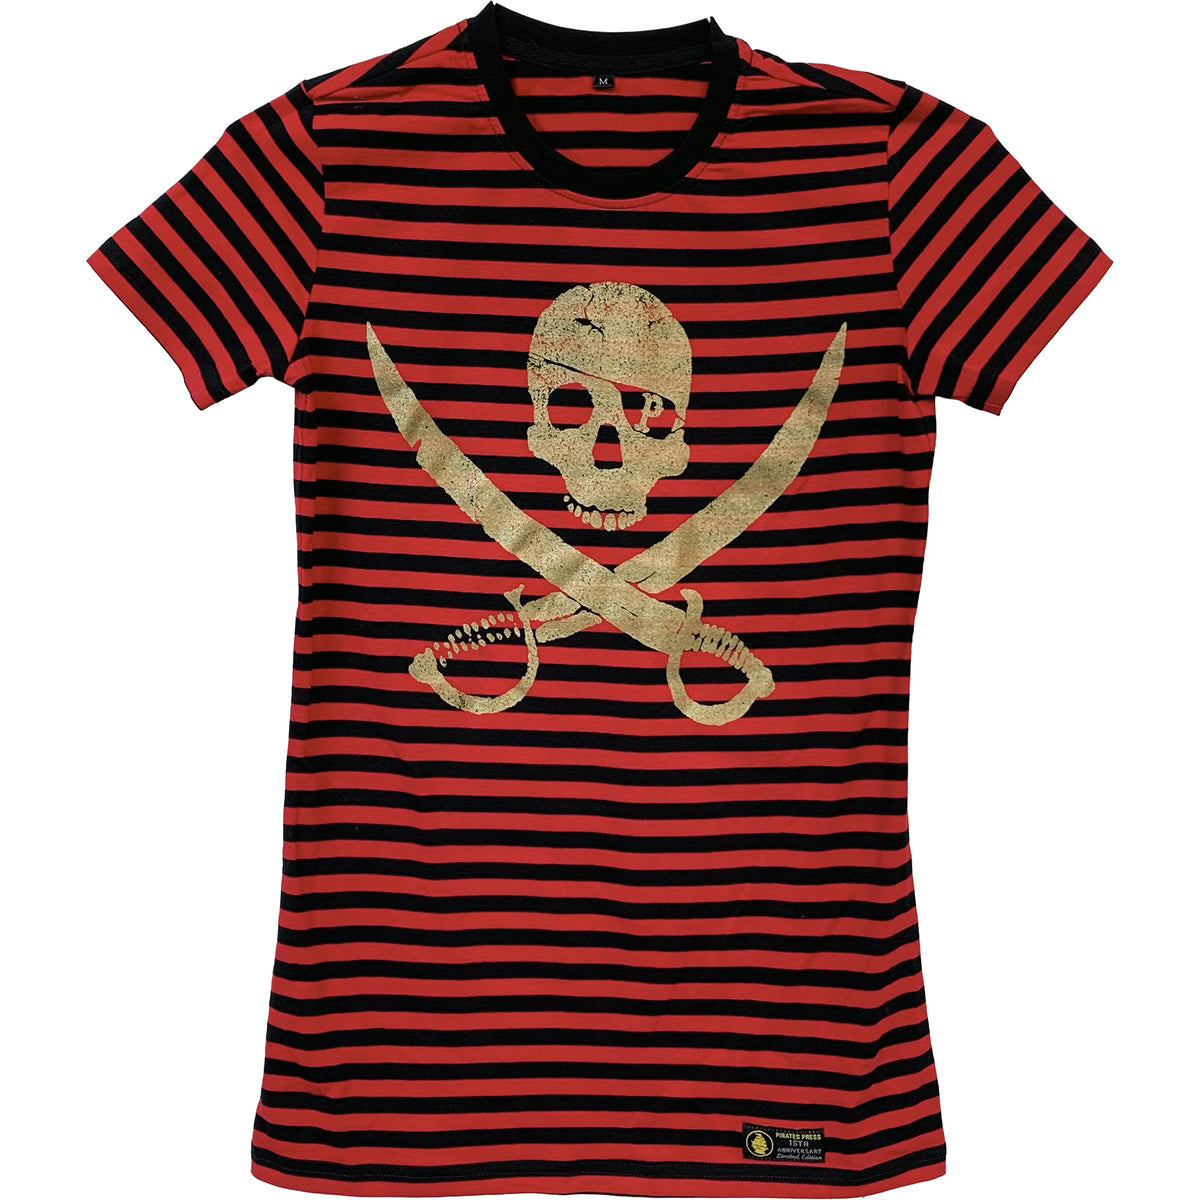 Pirates Press Records - Pirate Logo - Gold on Red &amp; Black Striped  - 15 Year Tag - T-Shirt - Fitted